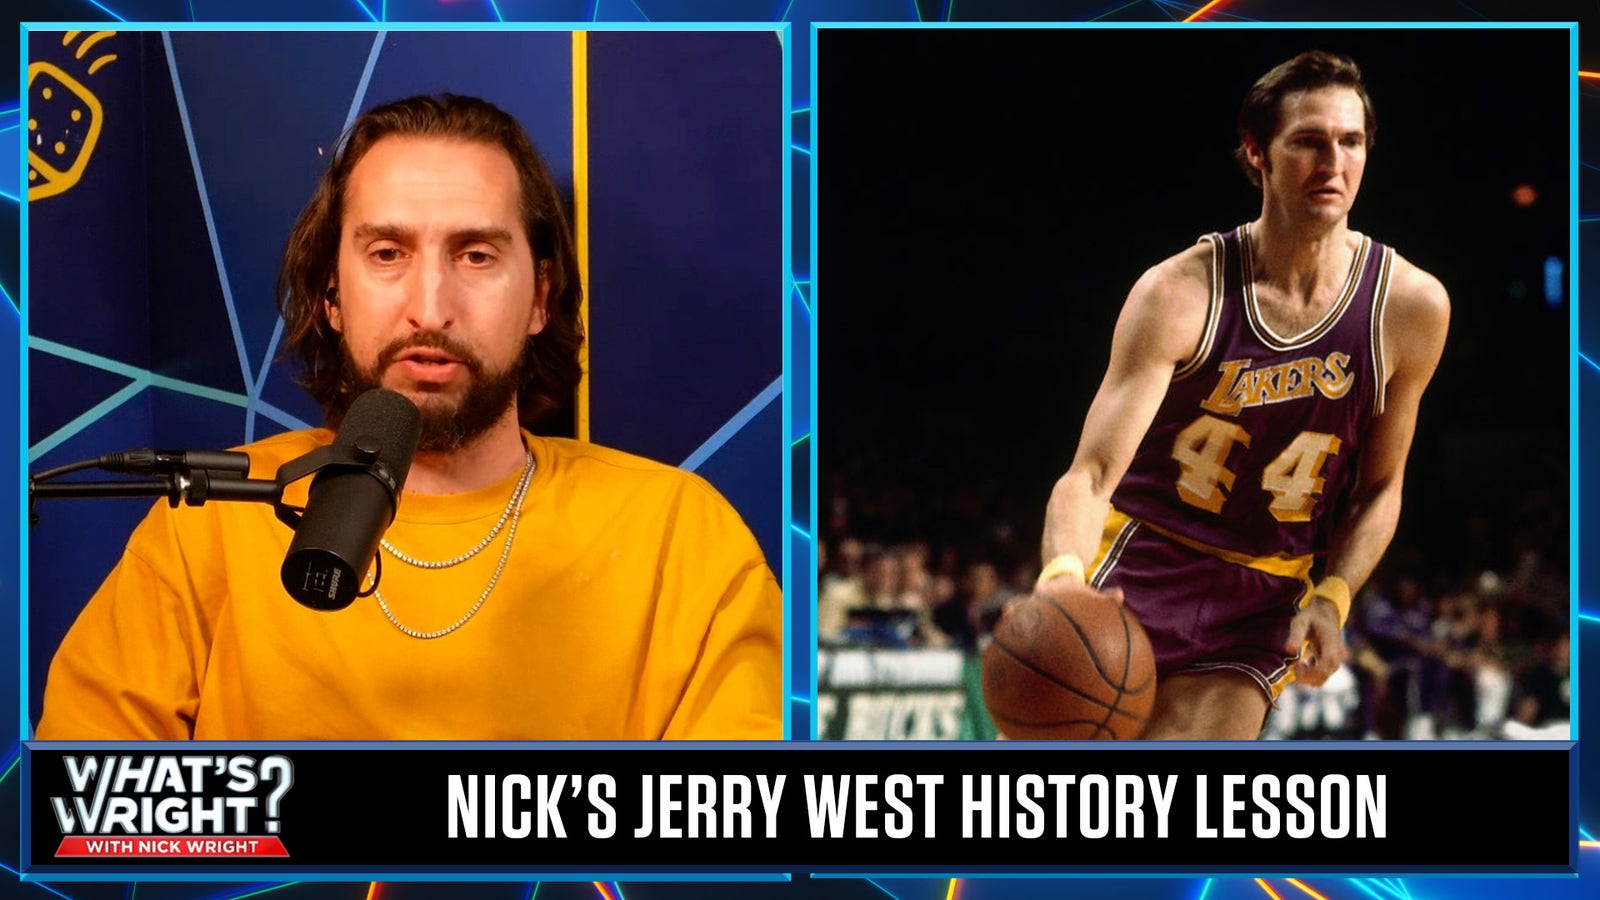 Nick honors Jerry West with a history lesson on 'The Logo' 